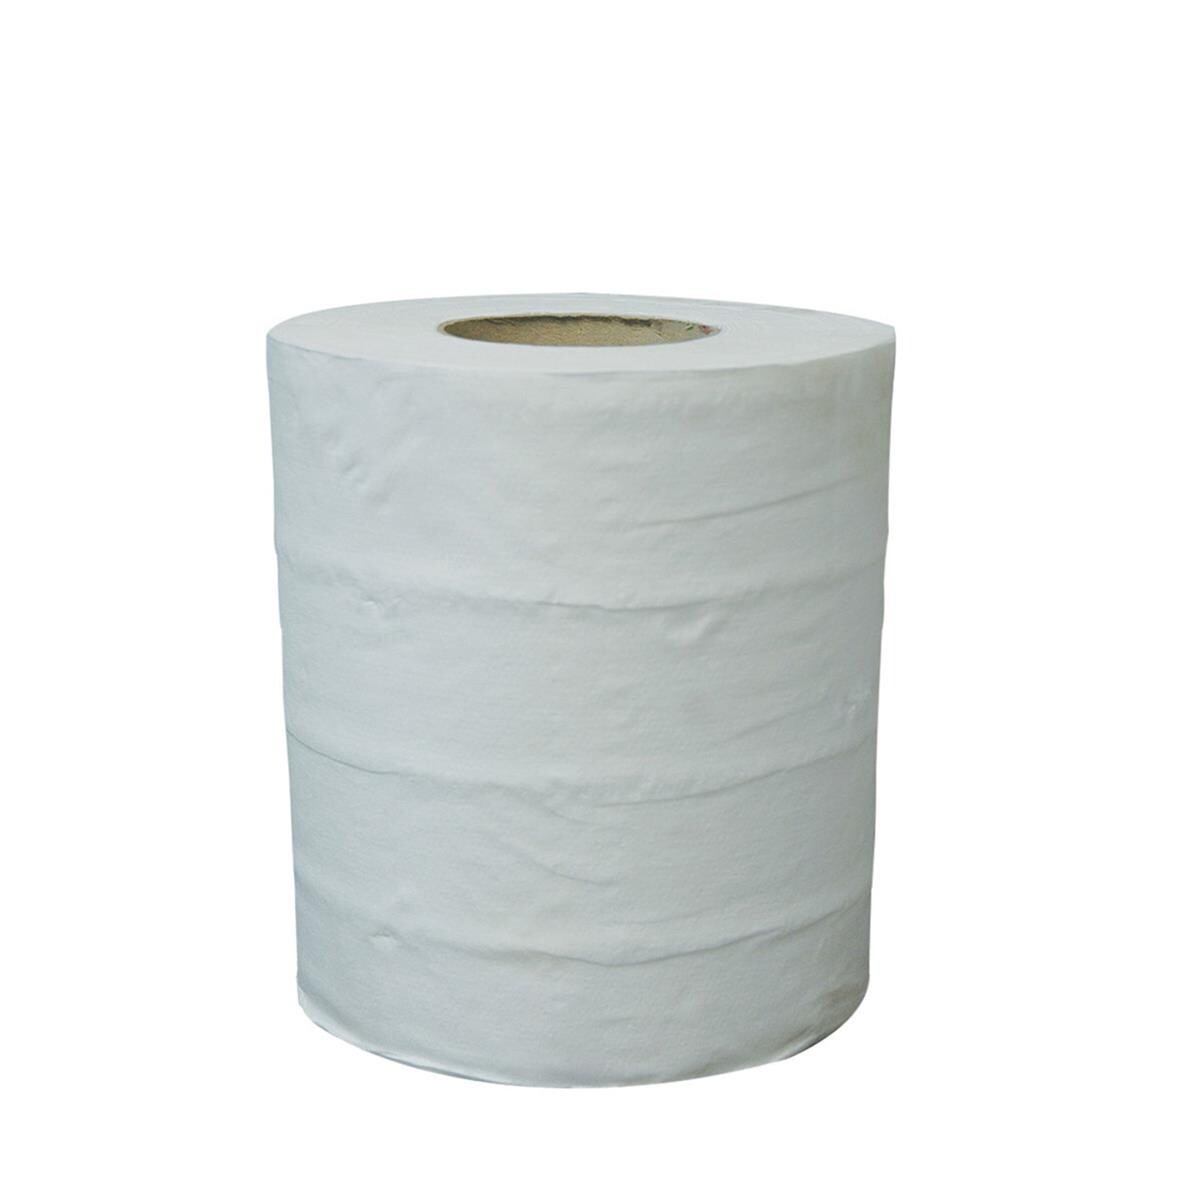 Enigma Towel Centre Feed Roll 2-ply White 6pk